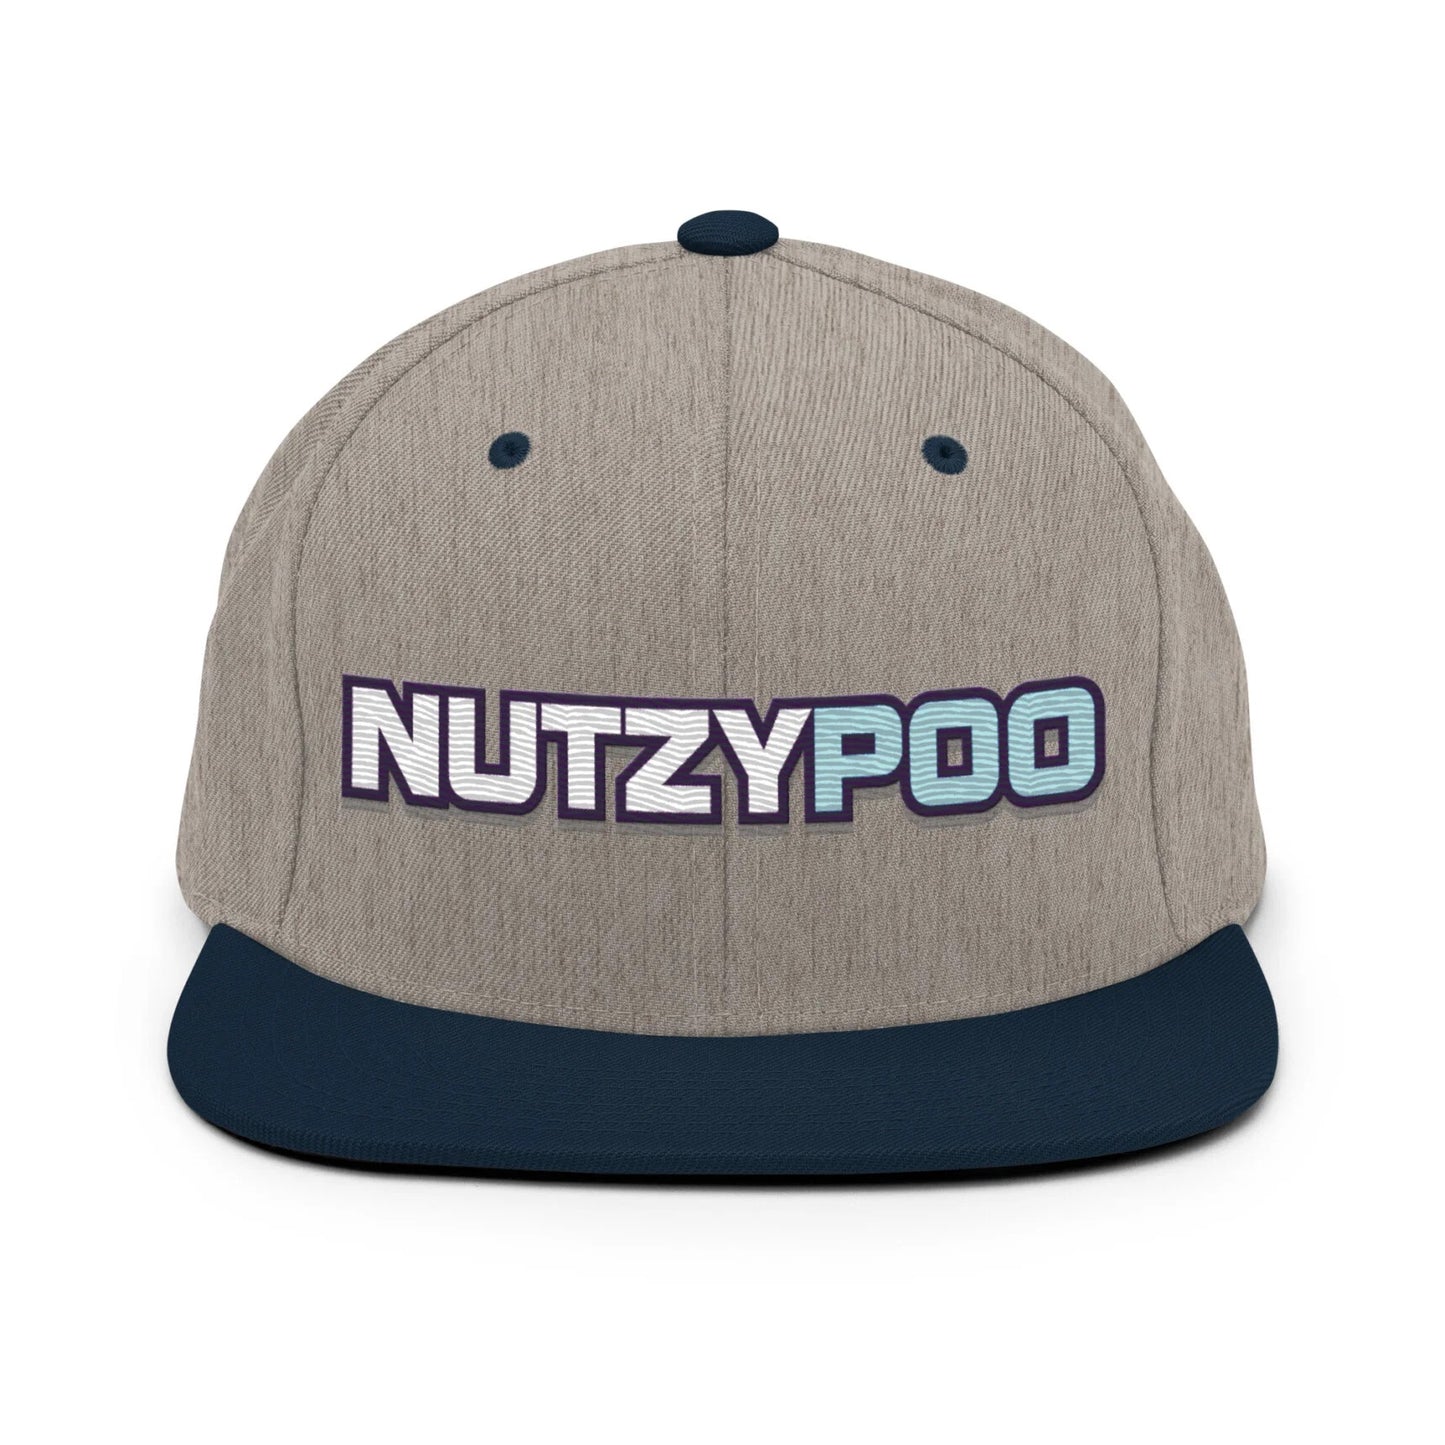 NutzyPoo ShowZone hat in heather grey with navy brim and accents